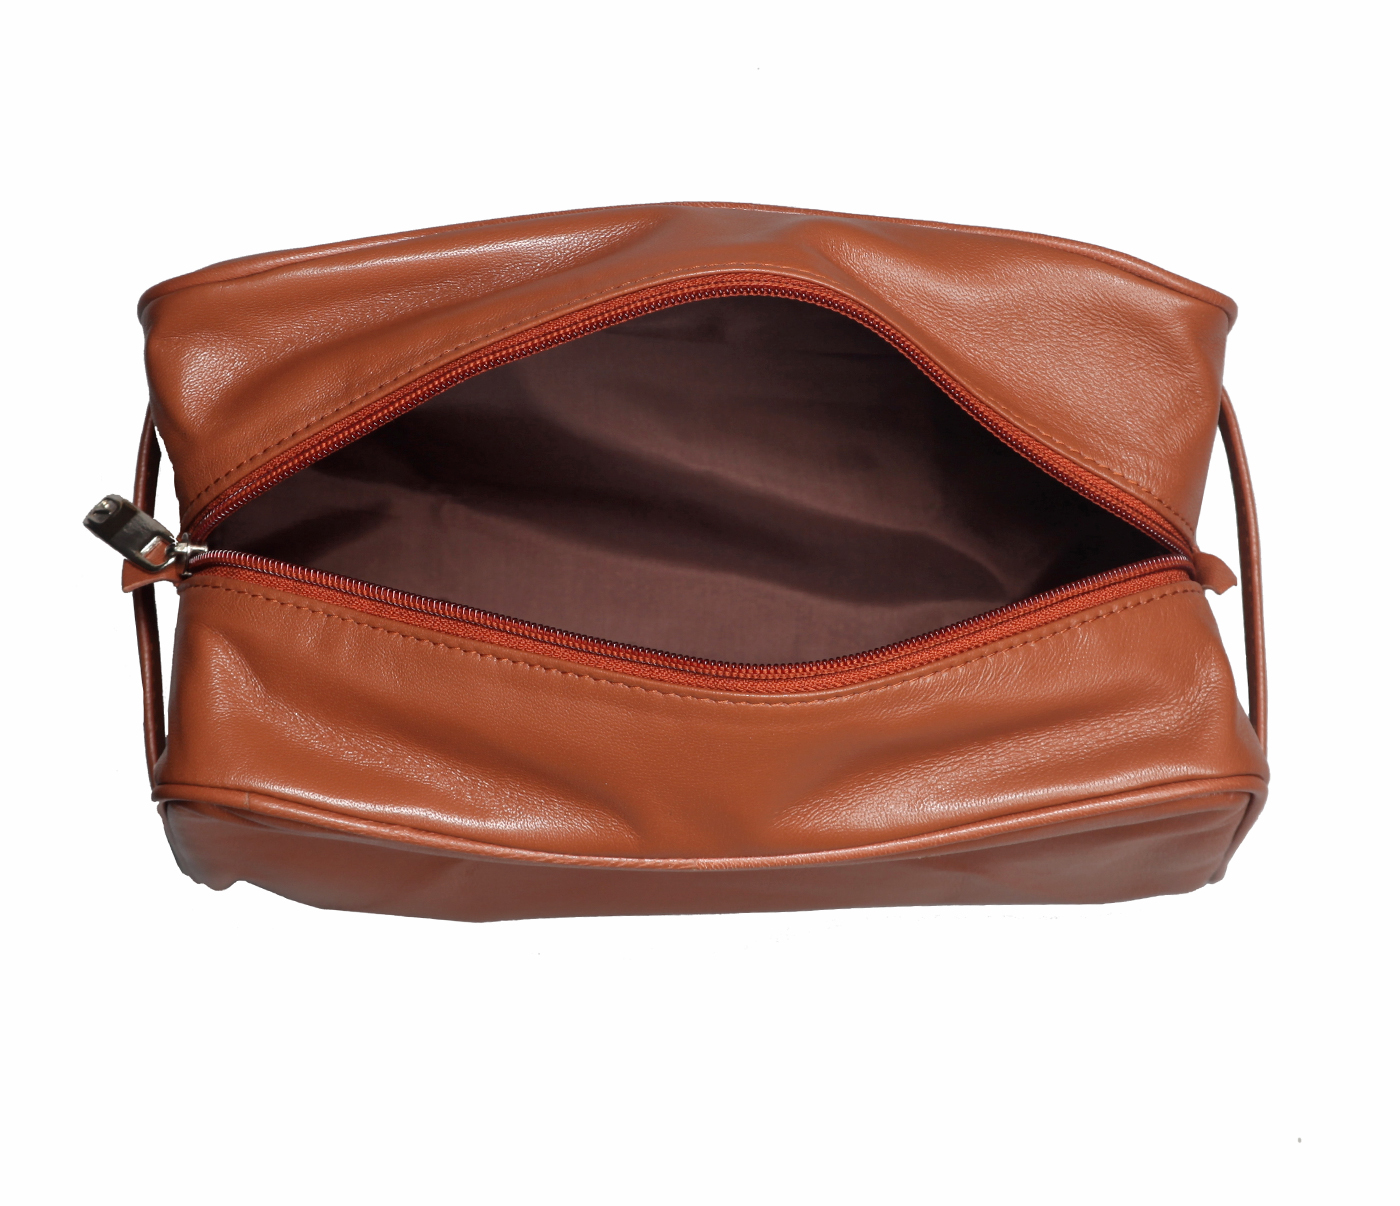 Travel Essential--Unisex Wash And Toiletry Travel Pouch In Genuine Leather - Tan